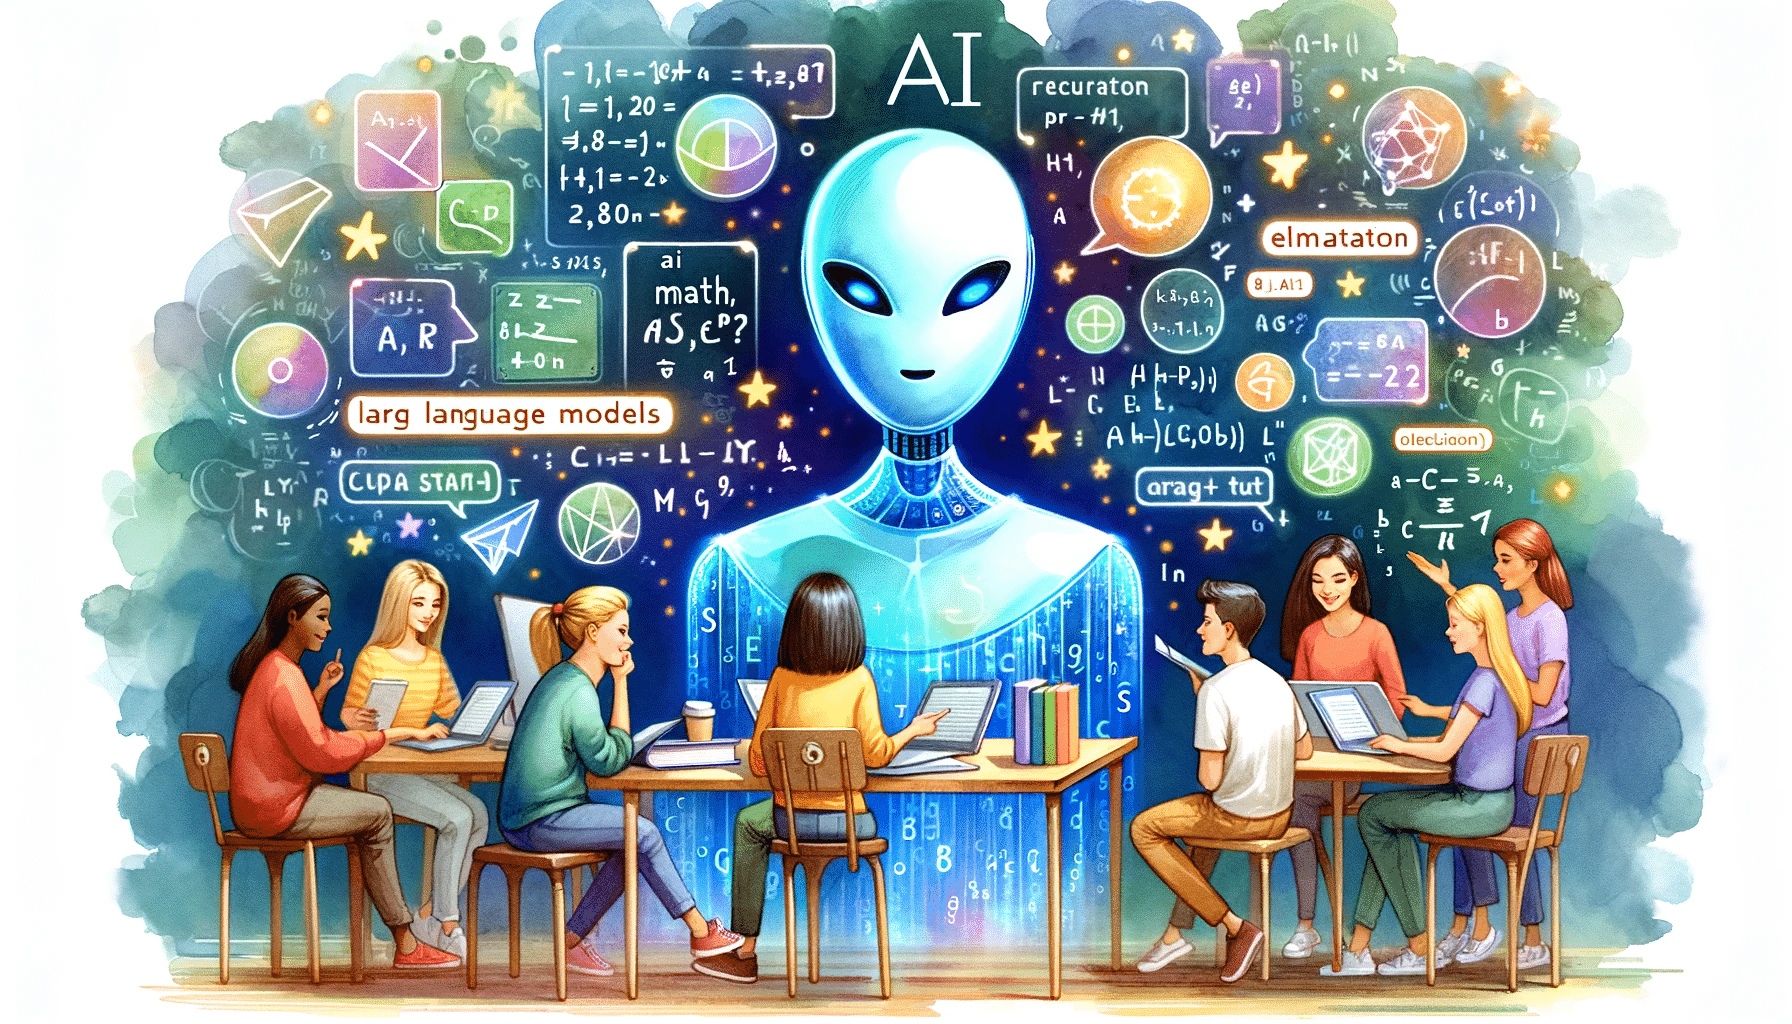 Illustration of an AI entity with a humanoid, holographic body surrounded by symbols and equations, leading a study session with attentive people at tables.